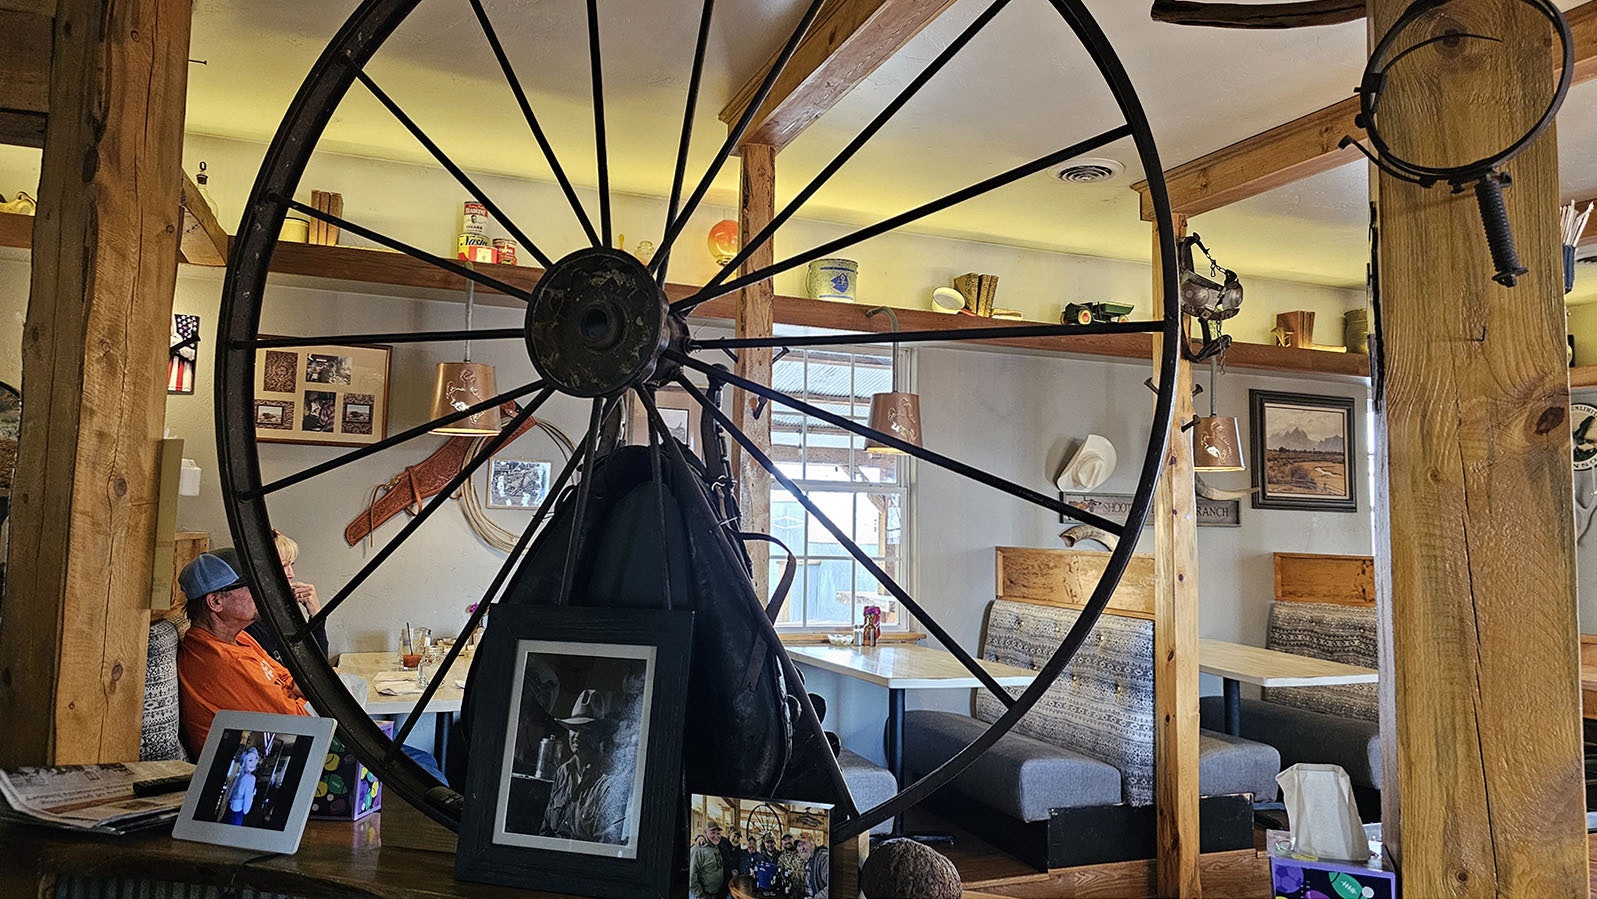 A wagon wheel helps bring definition to the space farming the bar and the dining area.